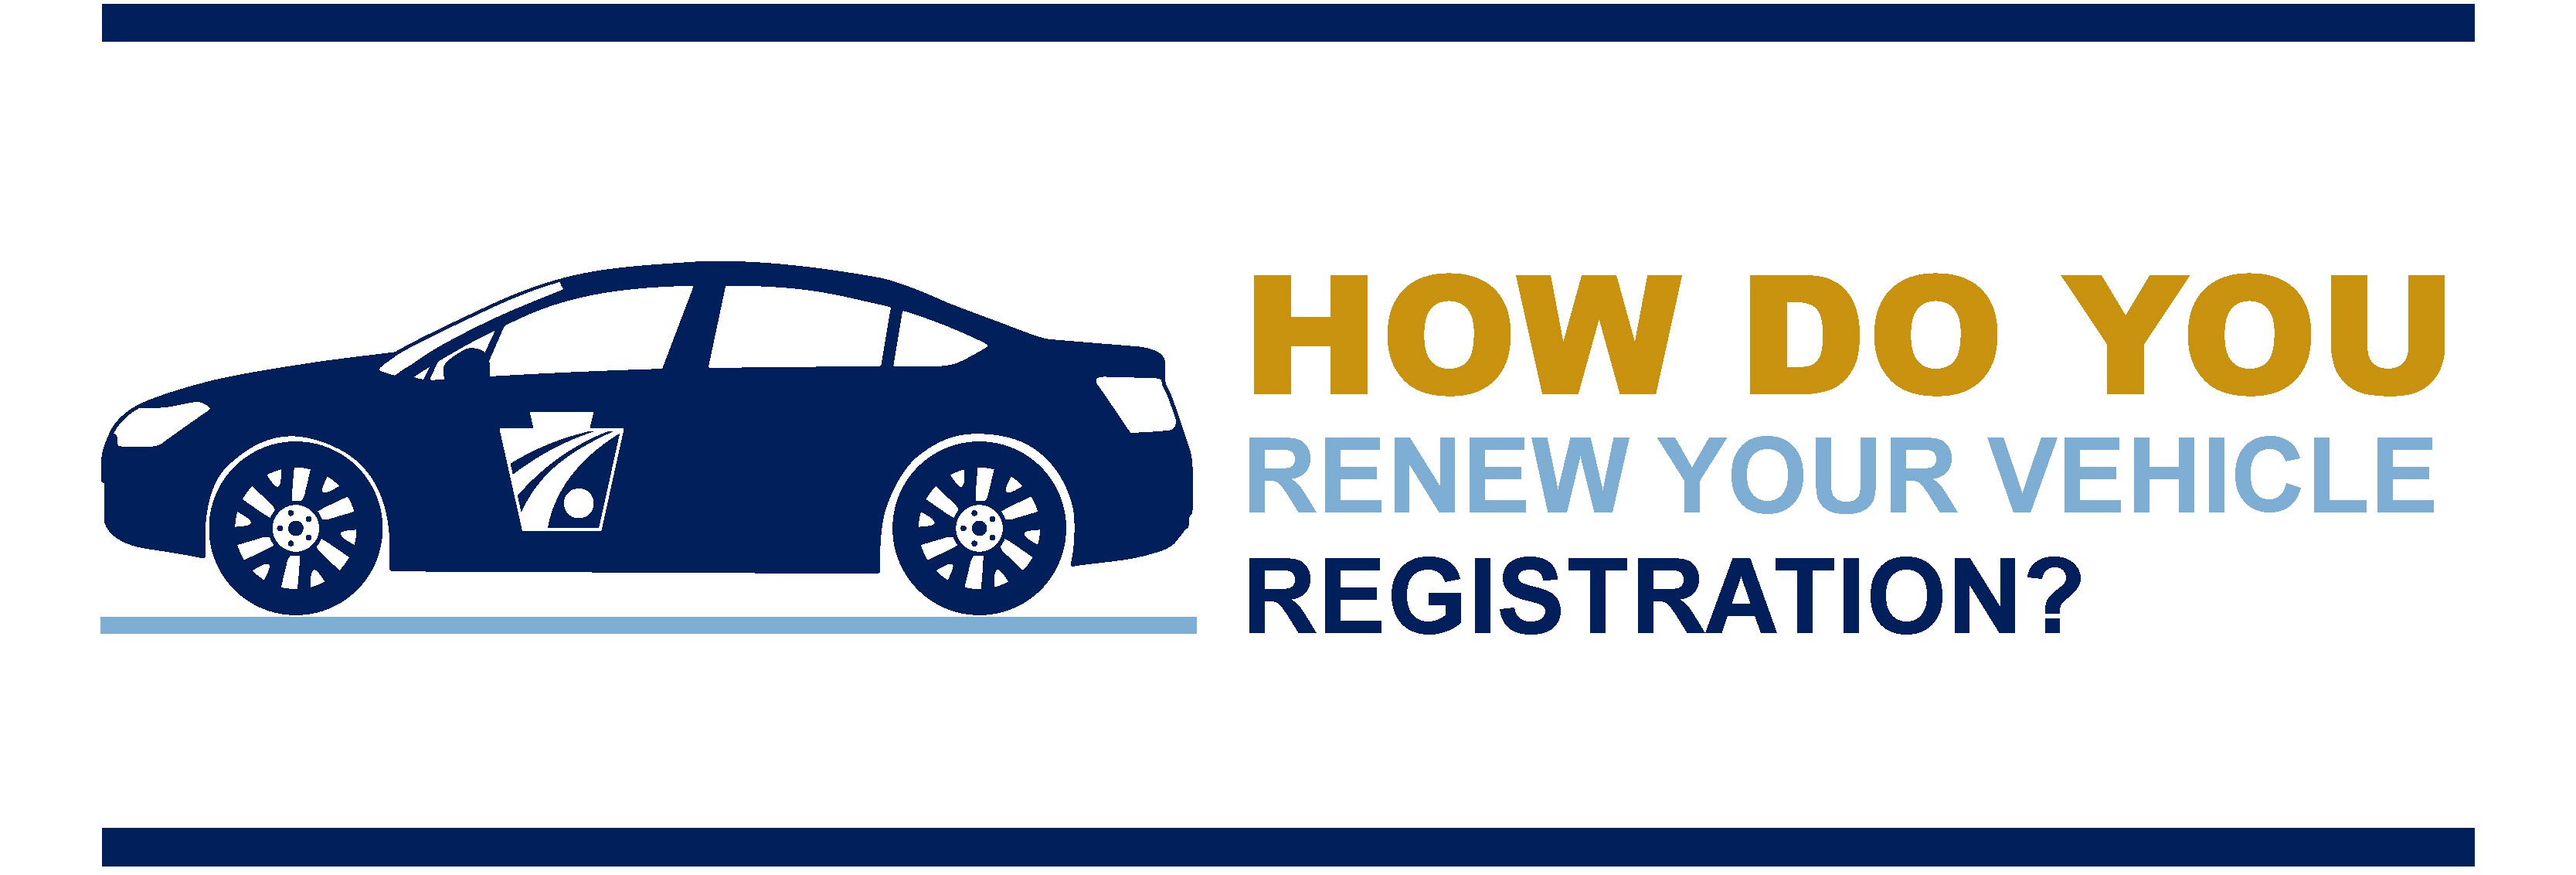 how do you renew your vehicle registration graphic